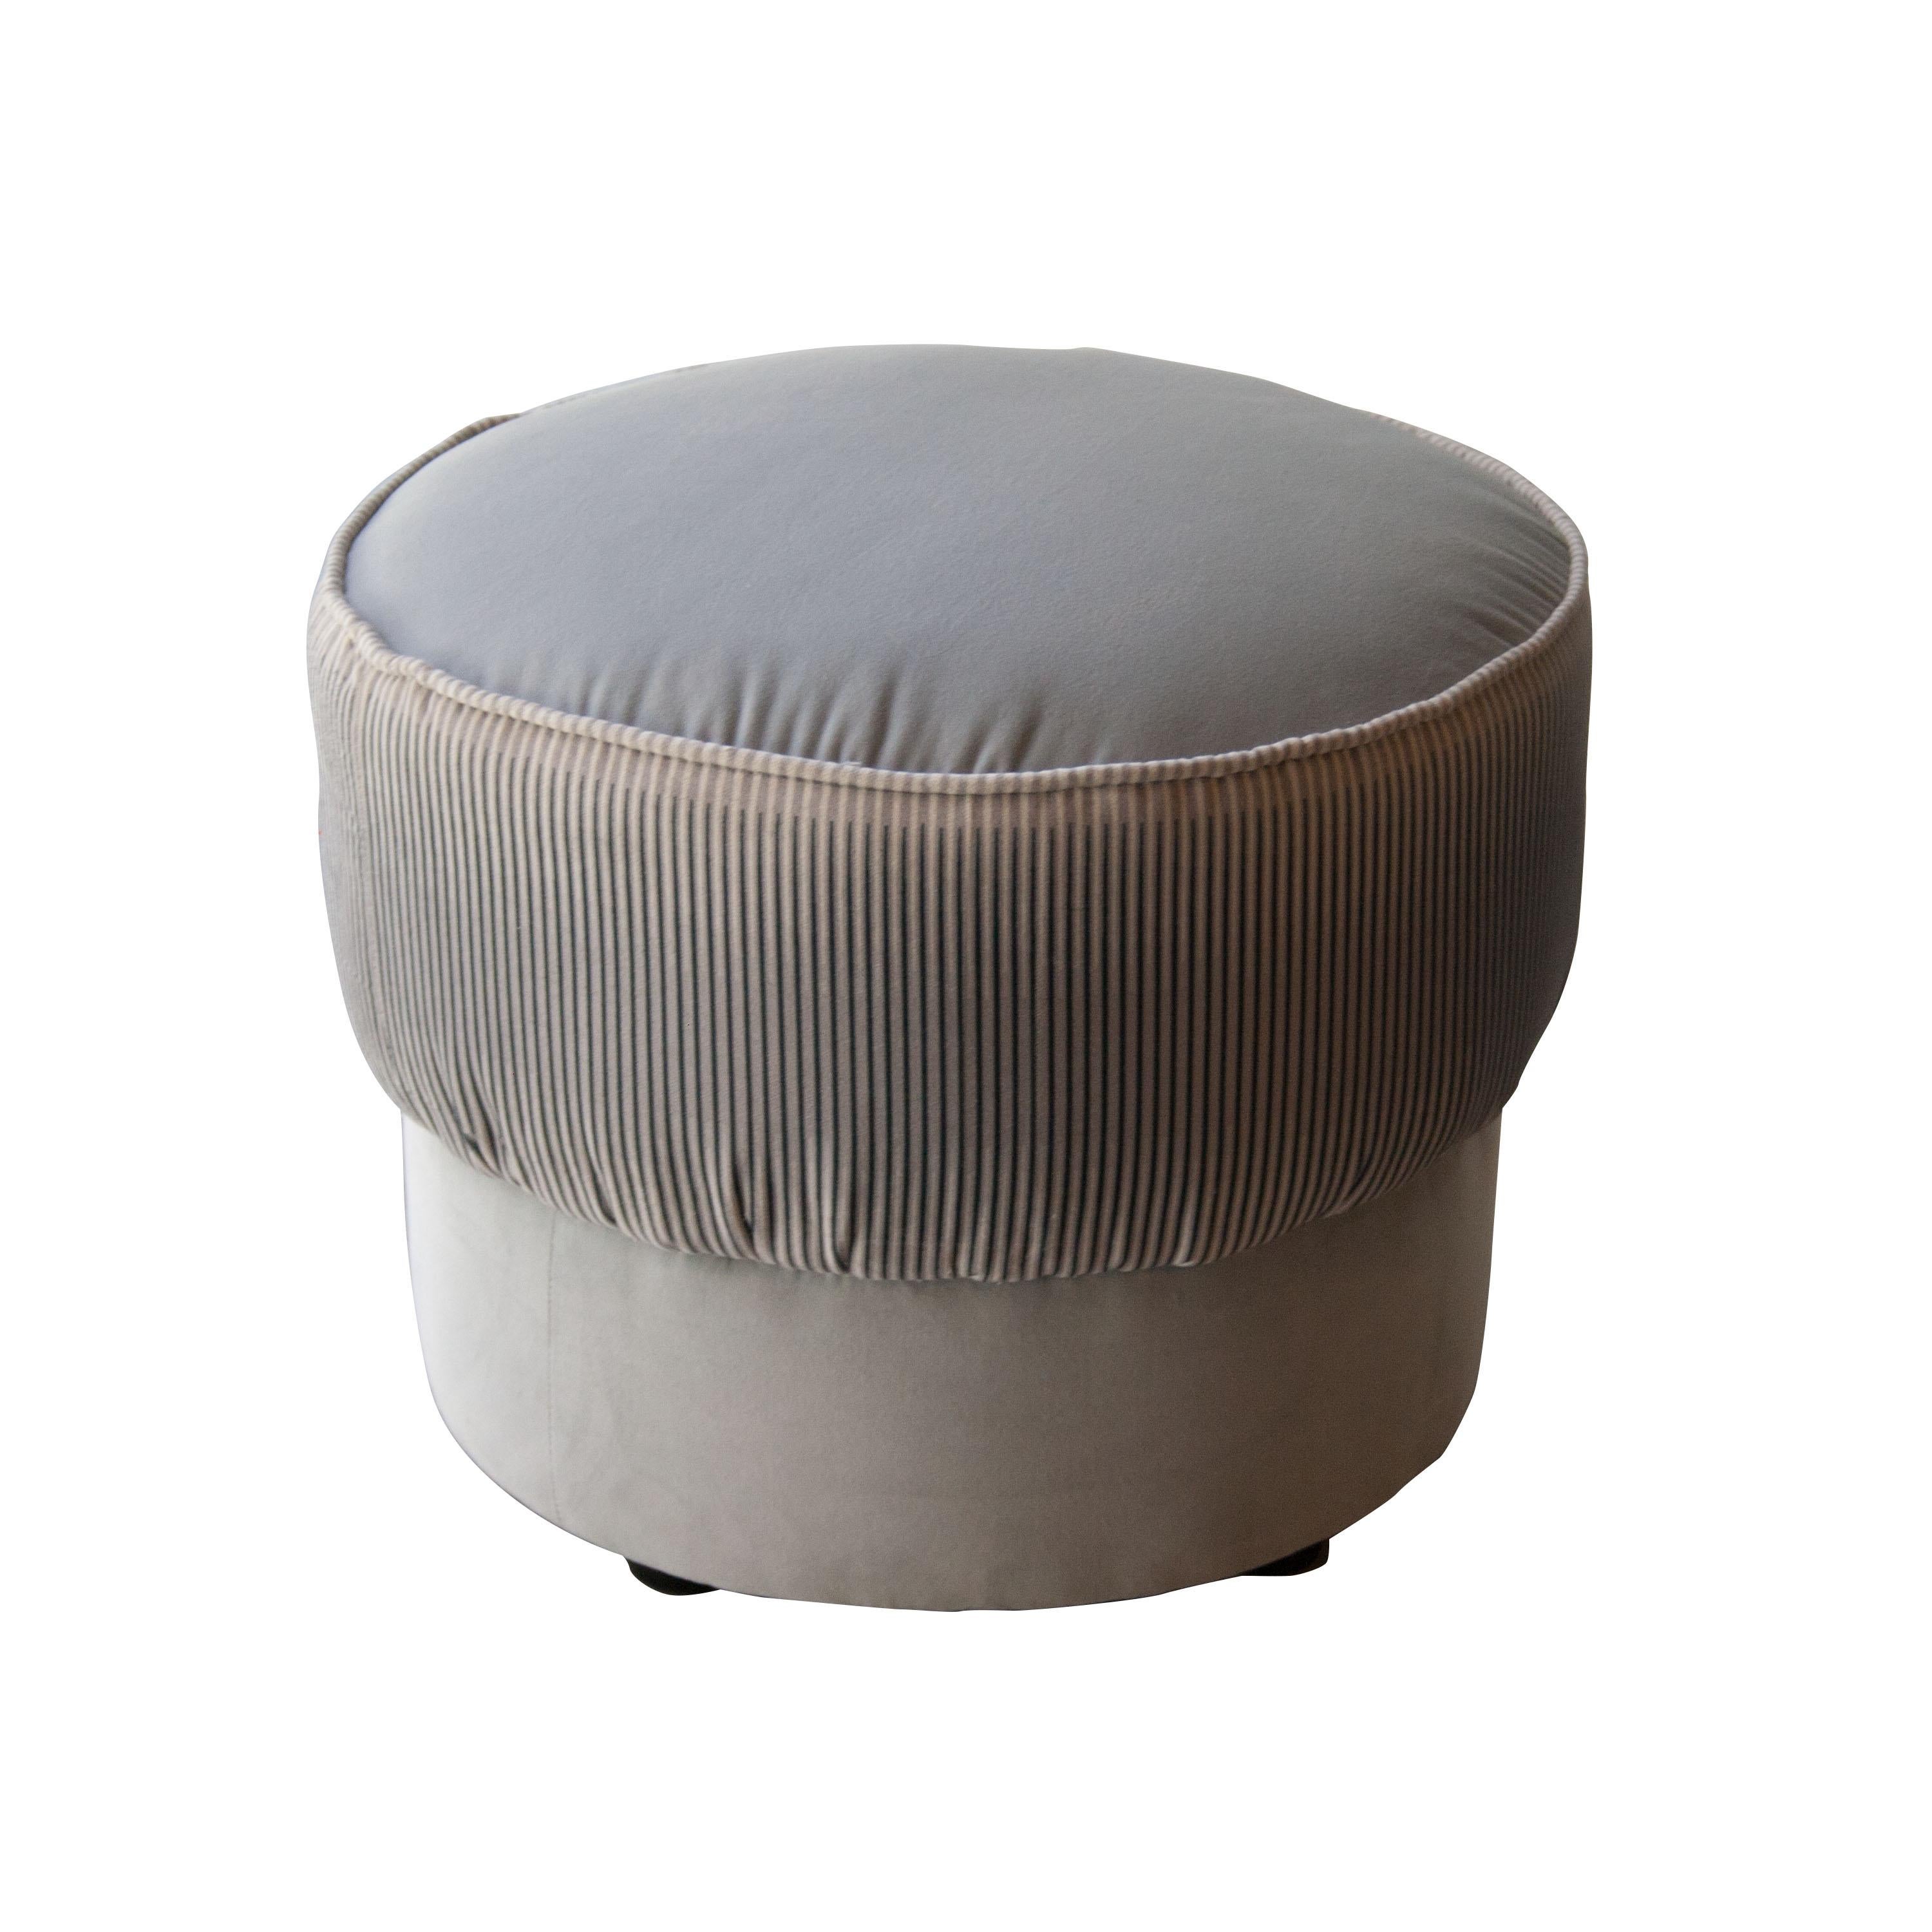 Rounded pouf with solid wood structure and upholstered in striped pattern fabric and velvet.